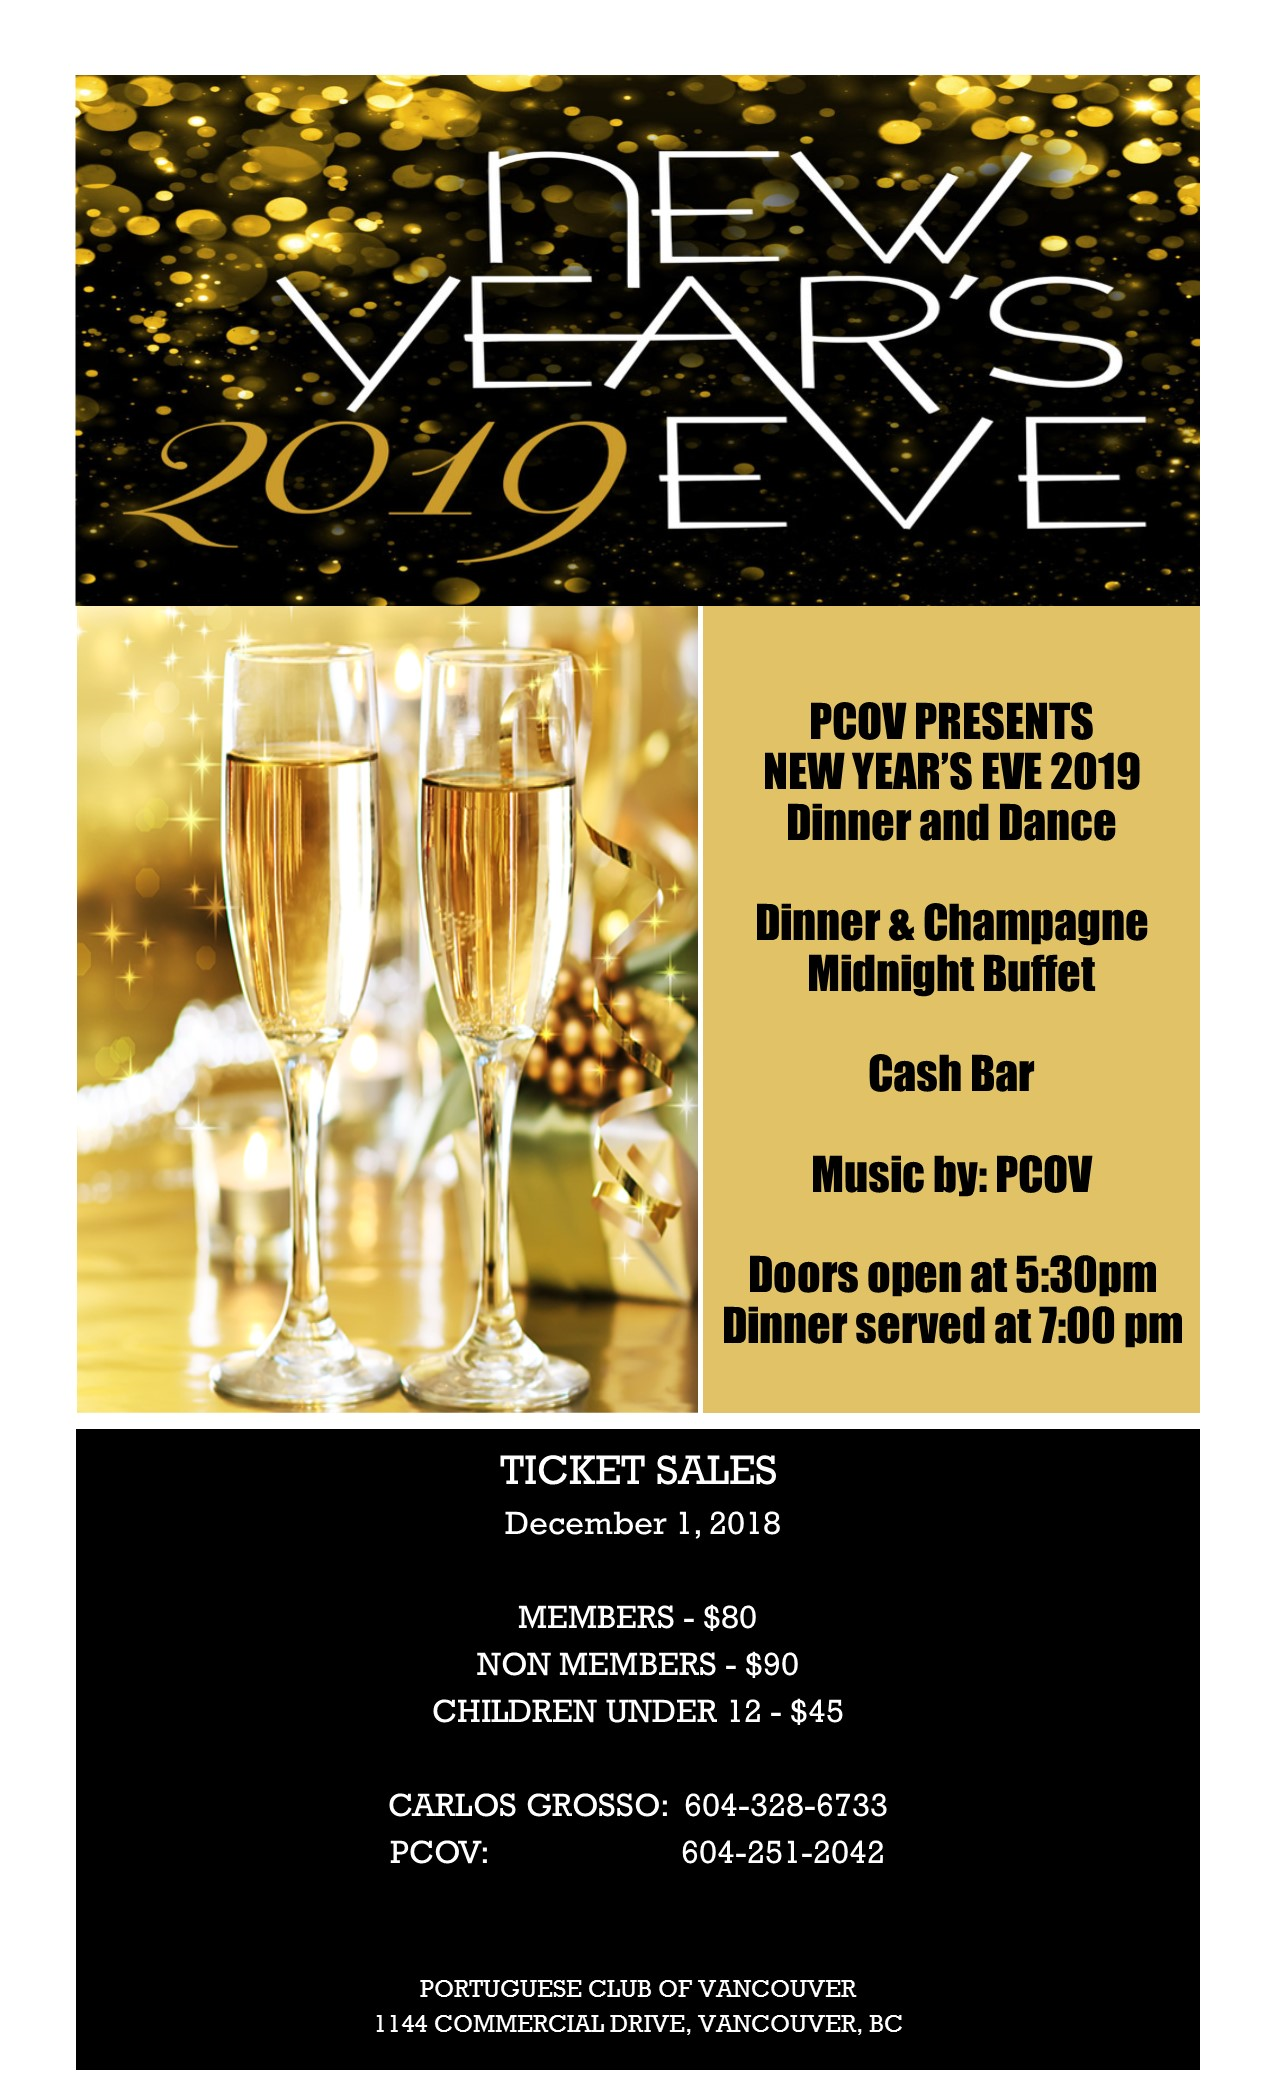 Portuguese Club of Vancouver, New Year’s Eve 2019